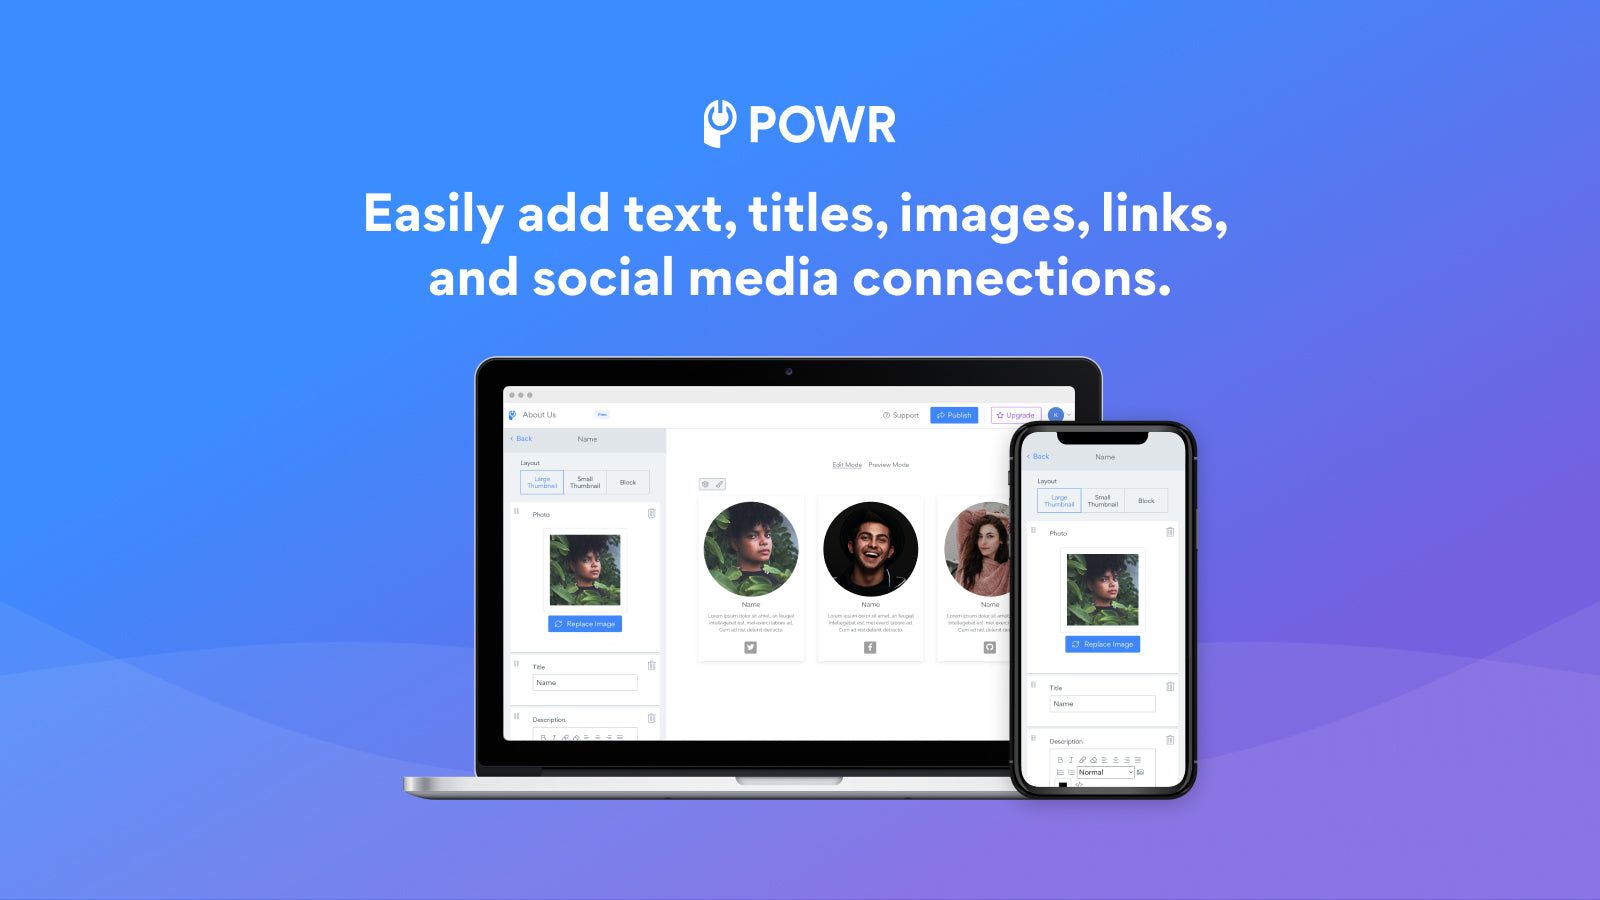 Add text, titles, images, links and social media accounts